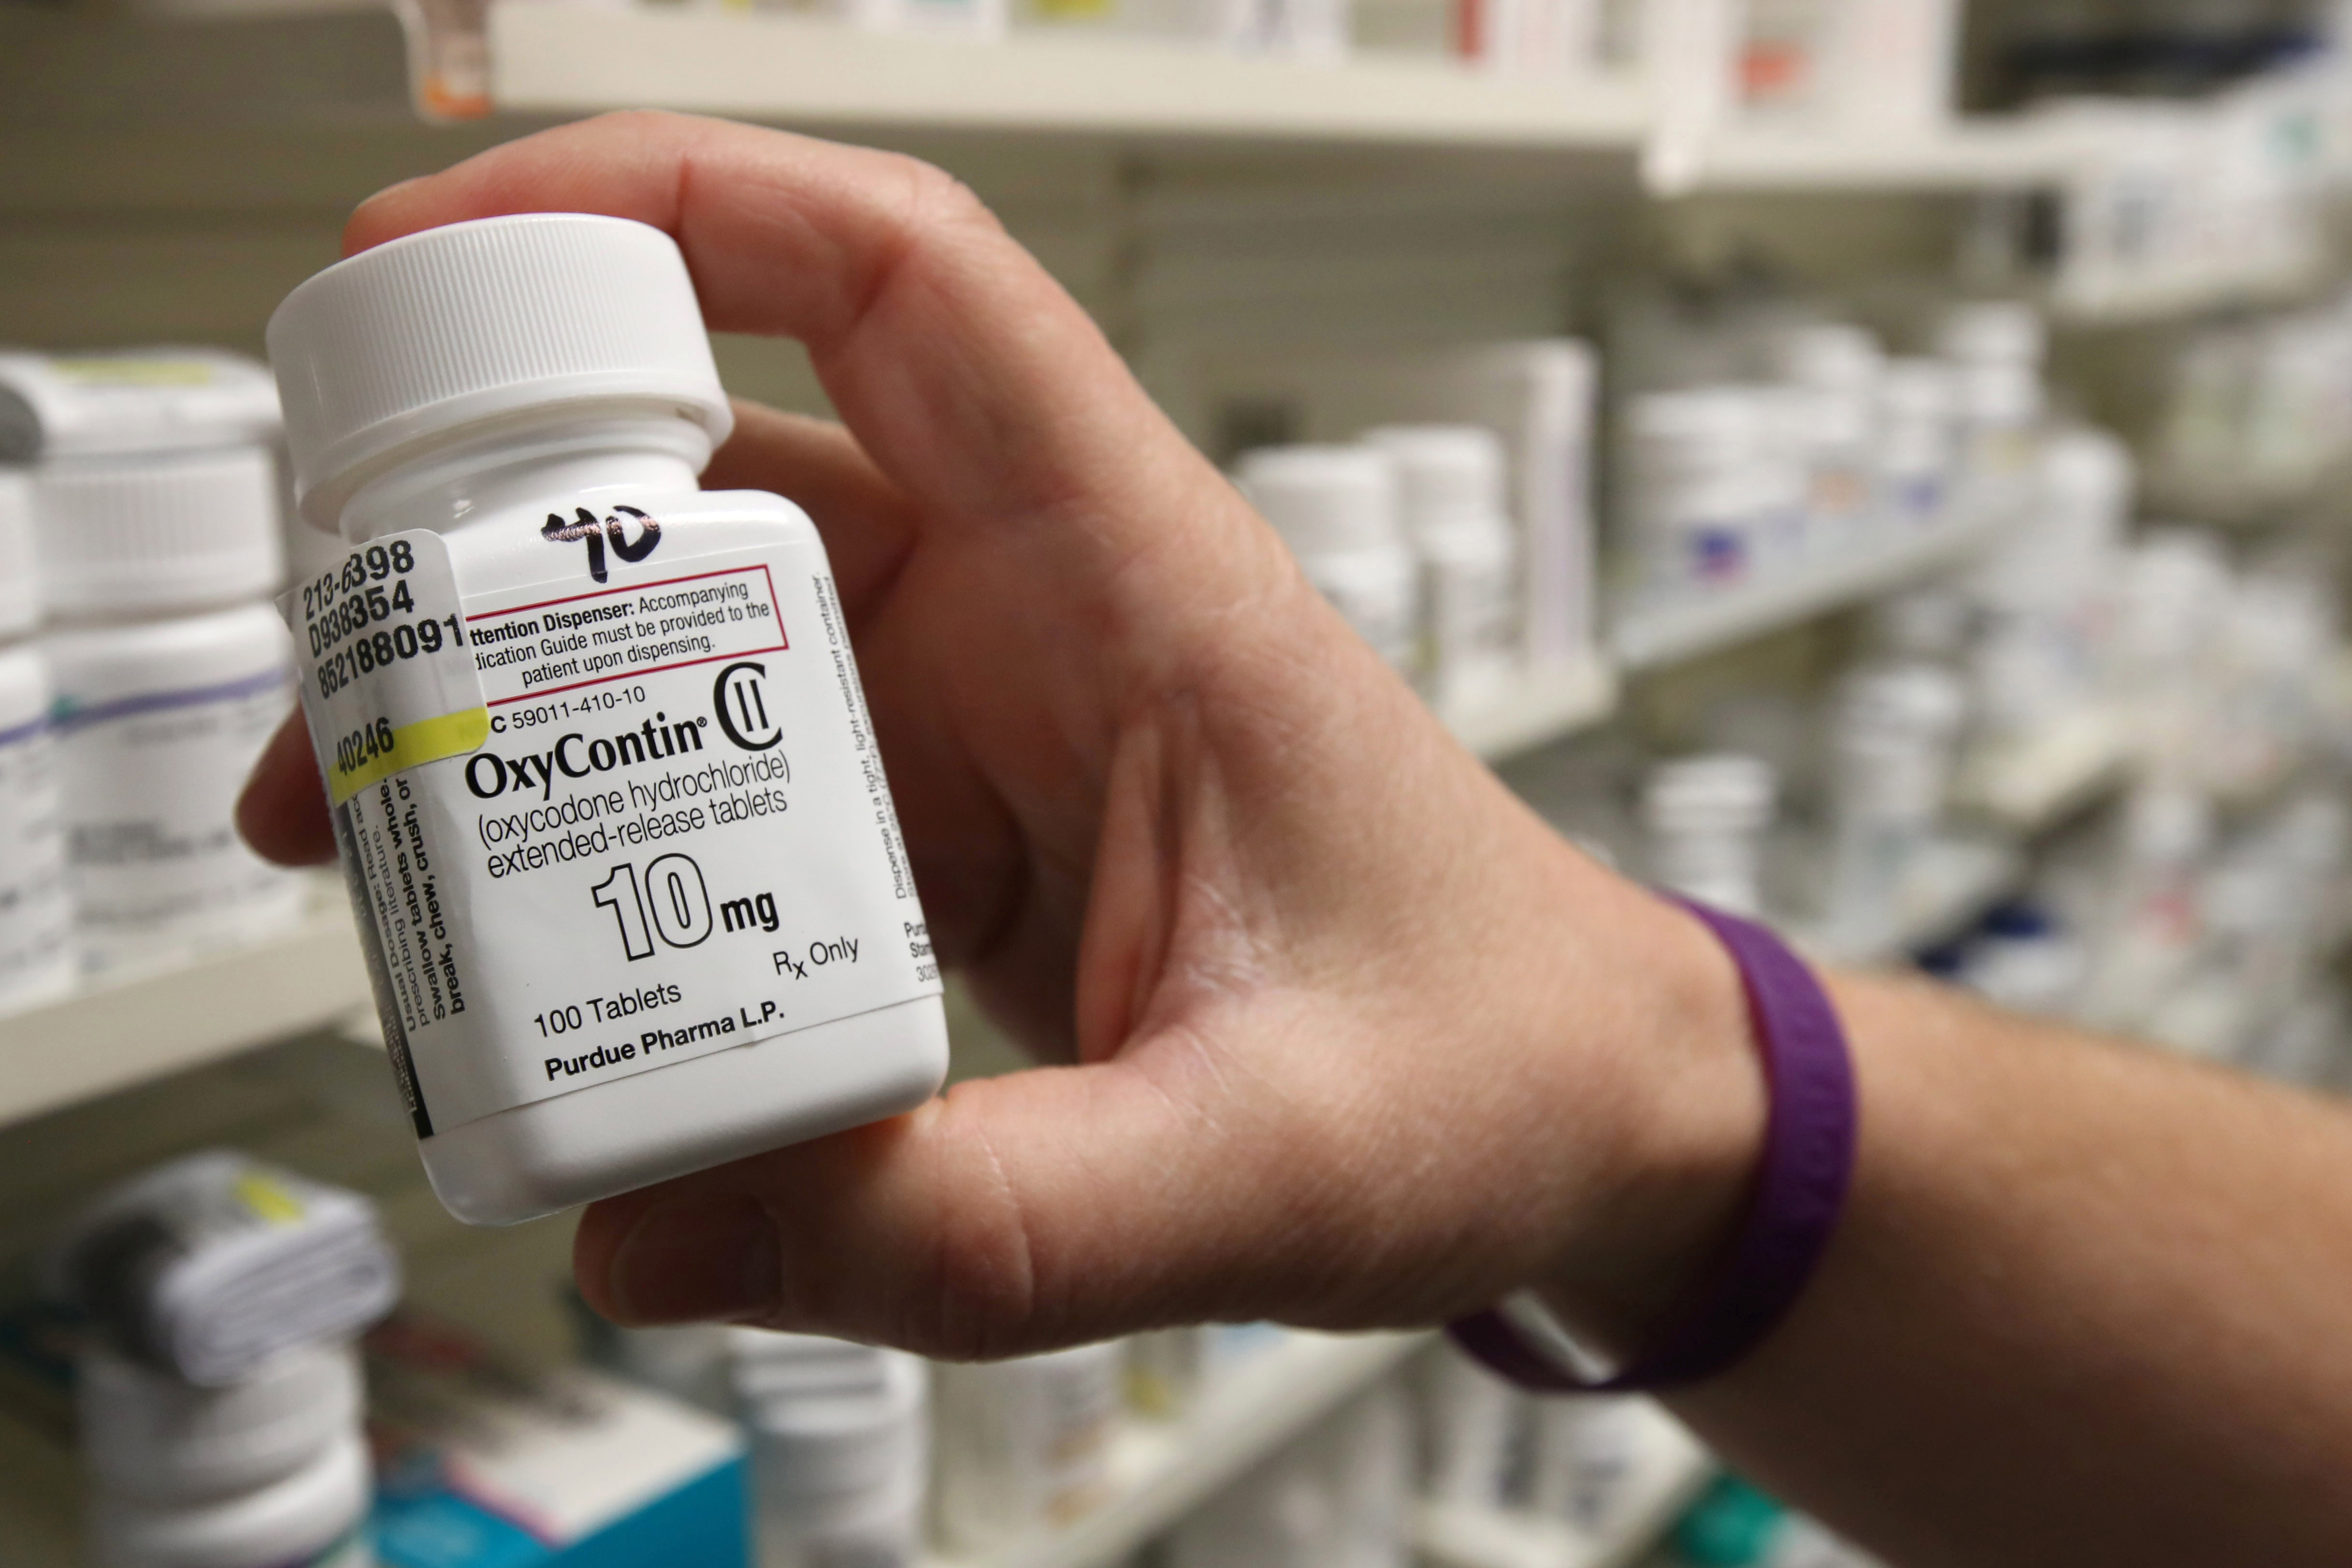 A pharmacist holds a bottle OxyContin made by Purdue Pharma at a pharmacy in Provo, Utah, U.S., May 9, 2019. REUTERS/George Frey